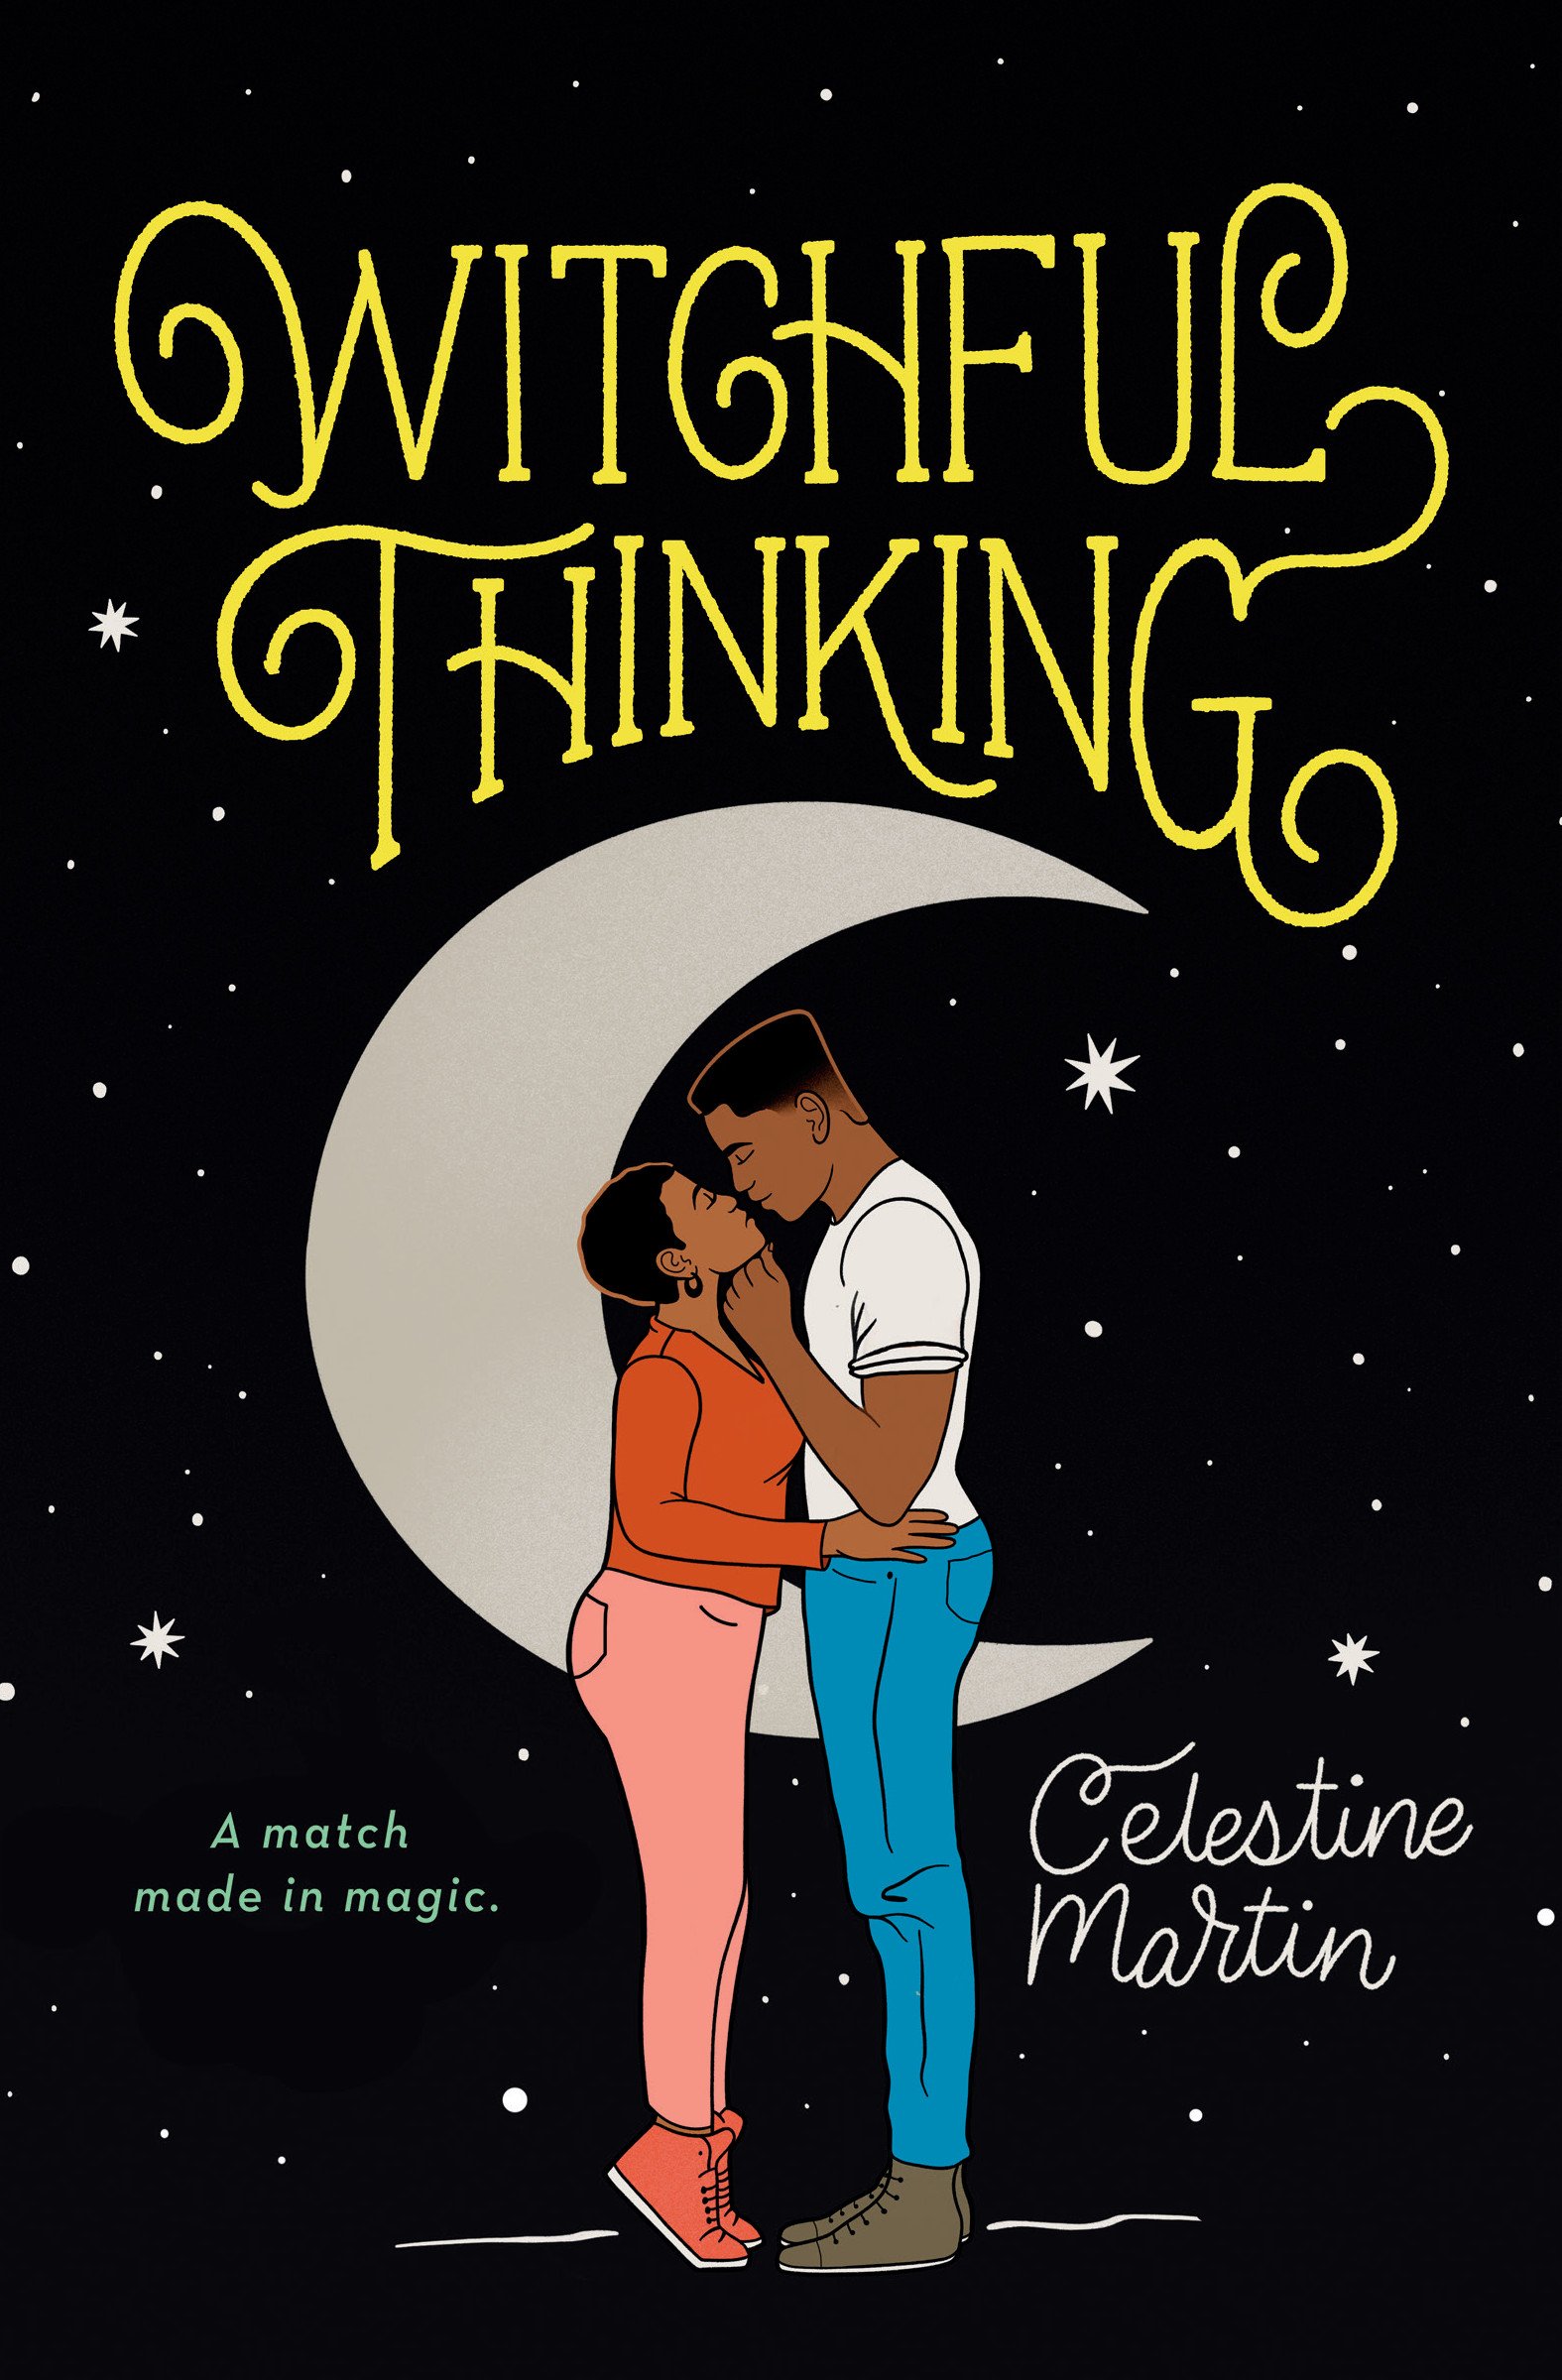 The cover of WItchful Thinking by Celestine Martin